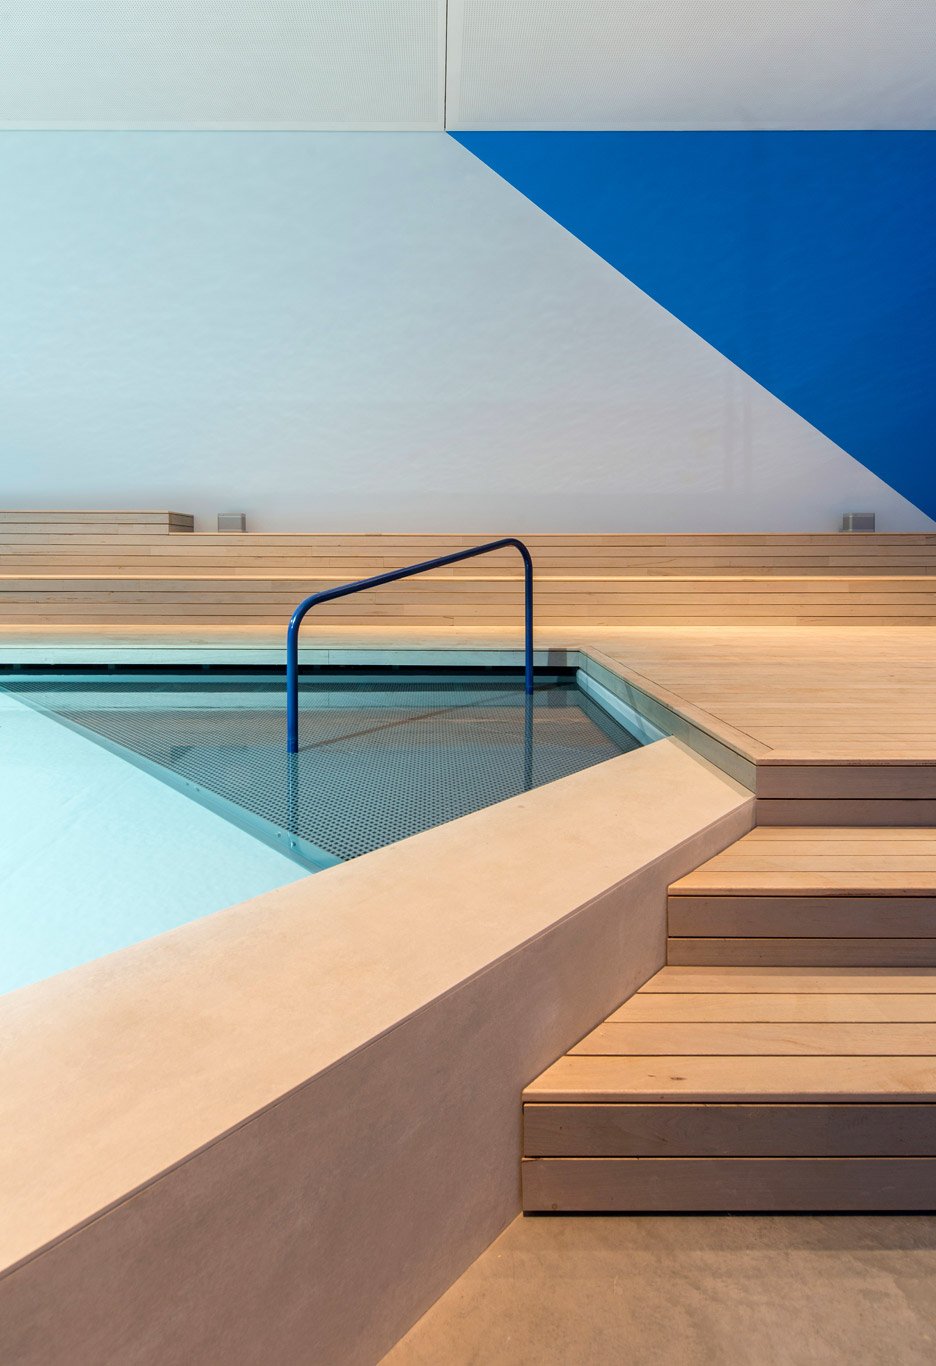 The Pool is the Australian exhibition curated by Aileen Sage Architects for the Venice Architecture Biennale 2016